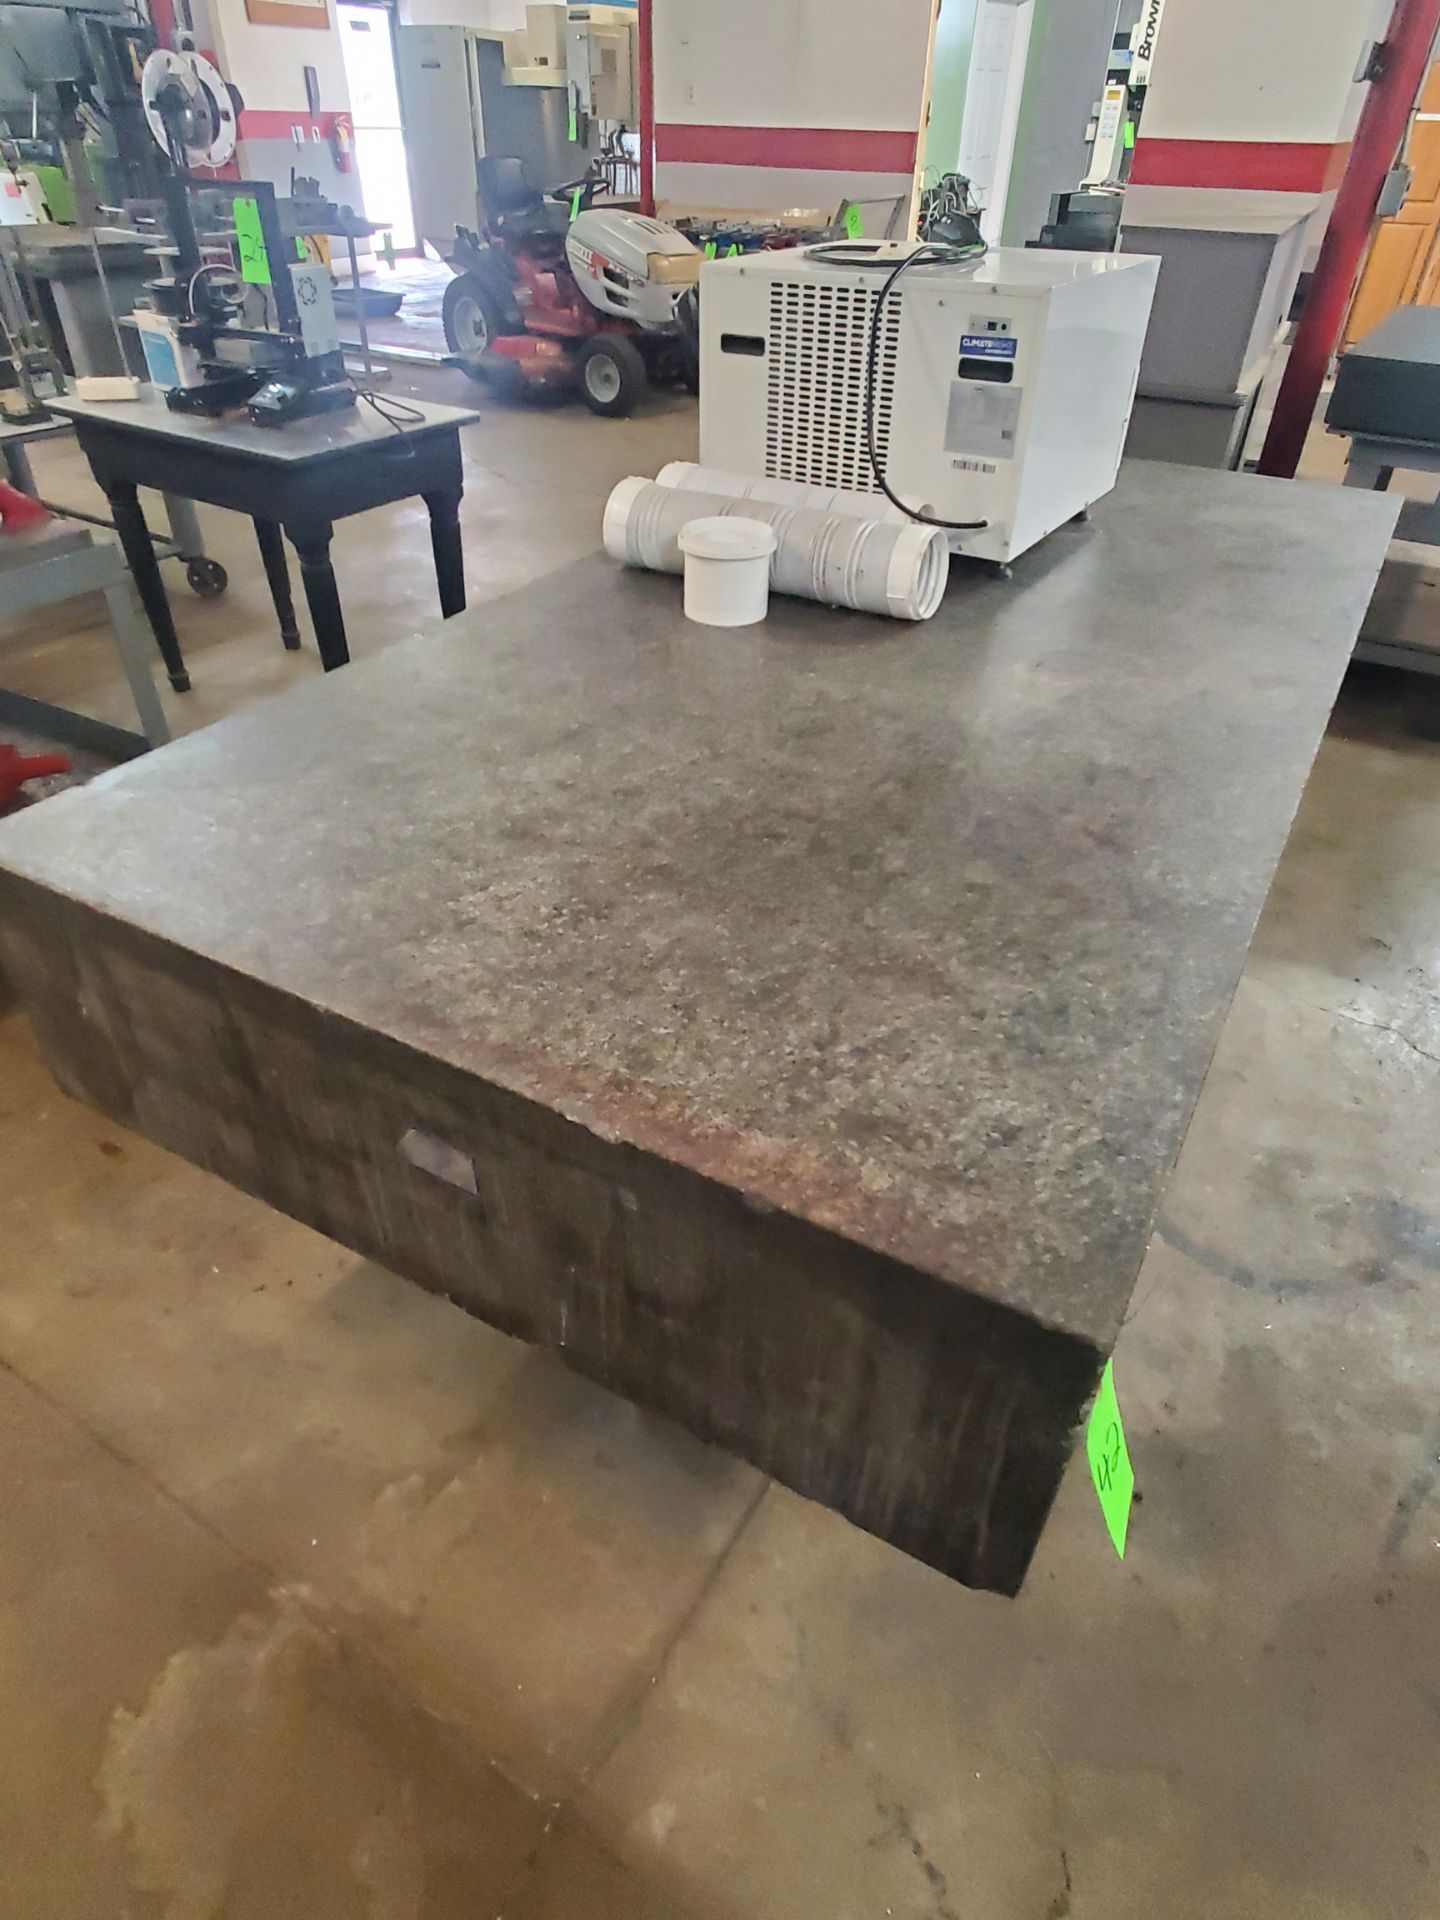 Granite Table w/ Stand, 96" x 48" x 14" - Image 2 of 5